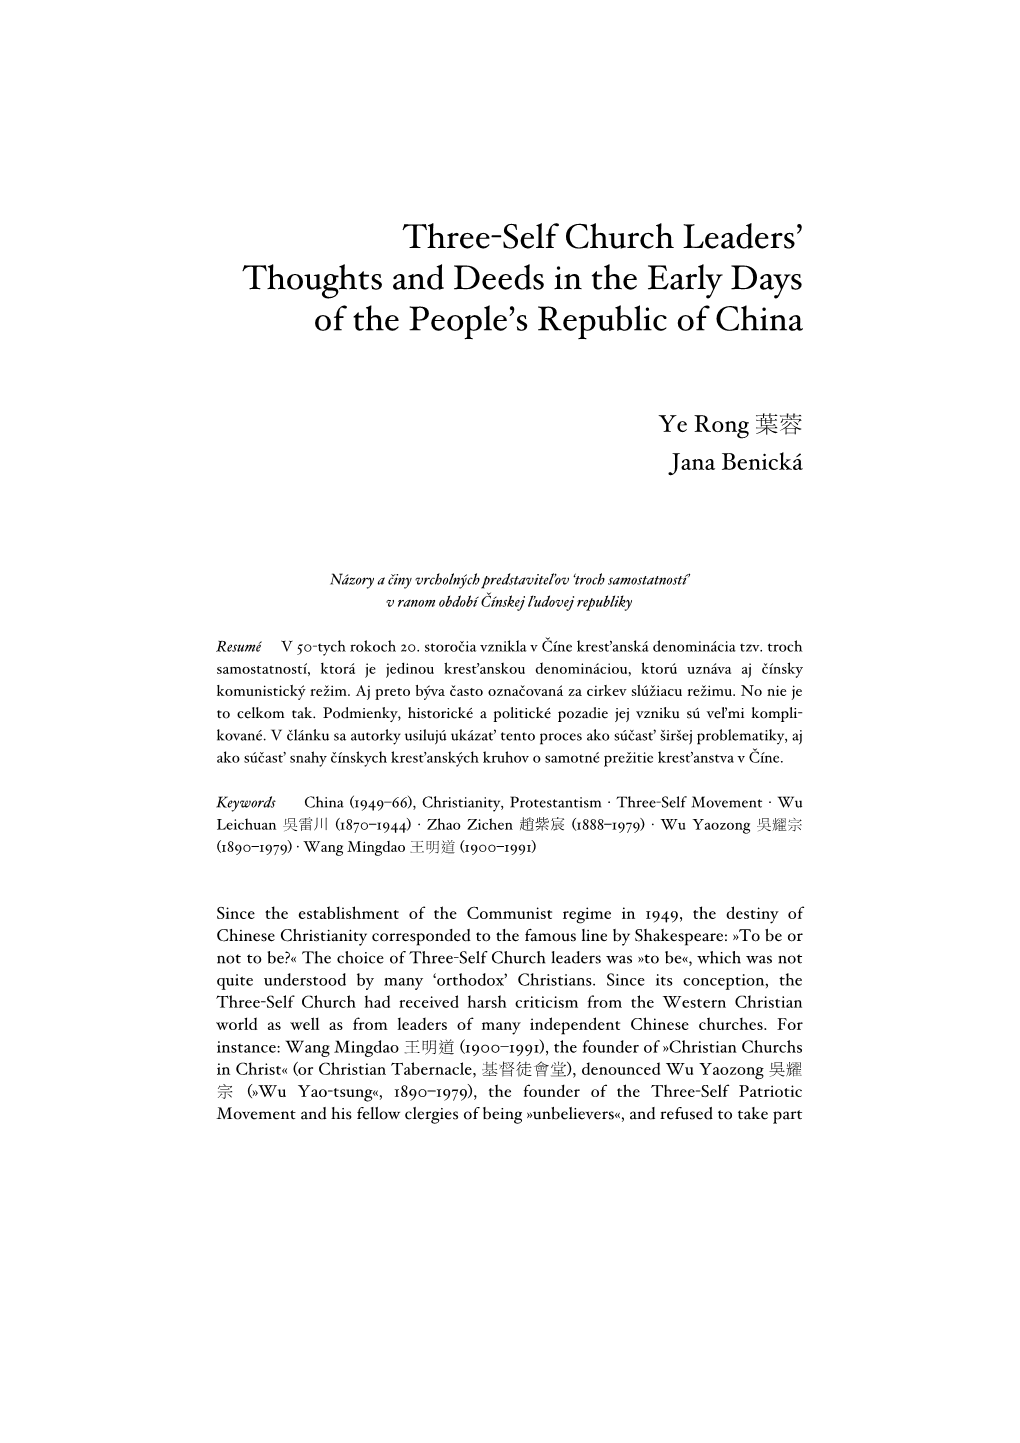 Three-Self Church Leaders' Thoughts and Deeds in the Early Days of The